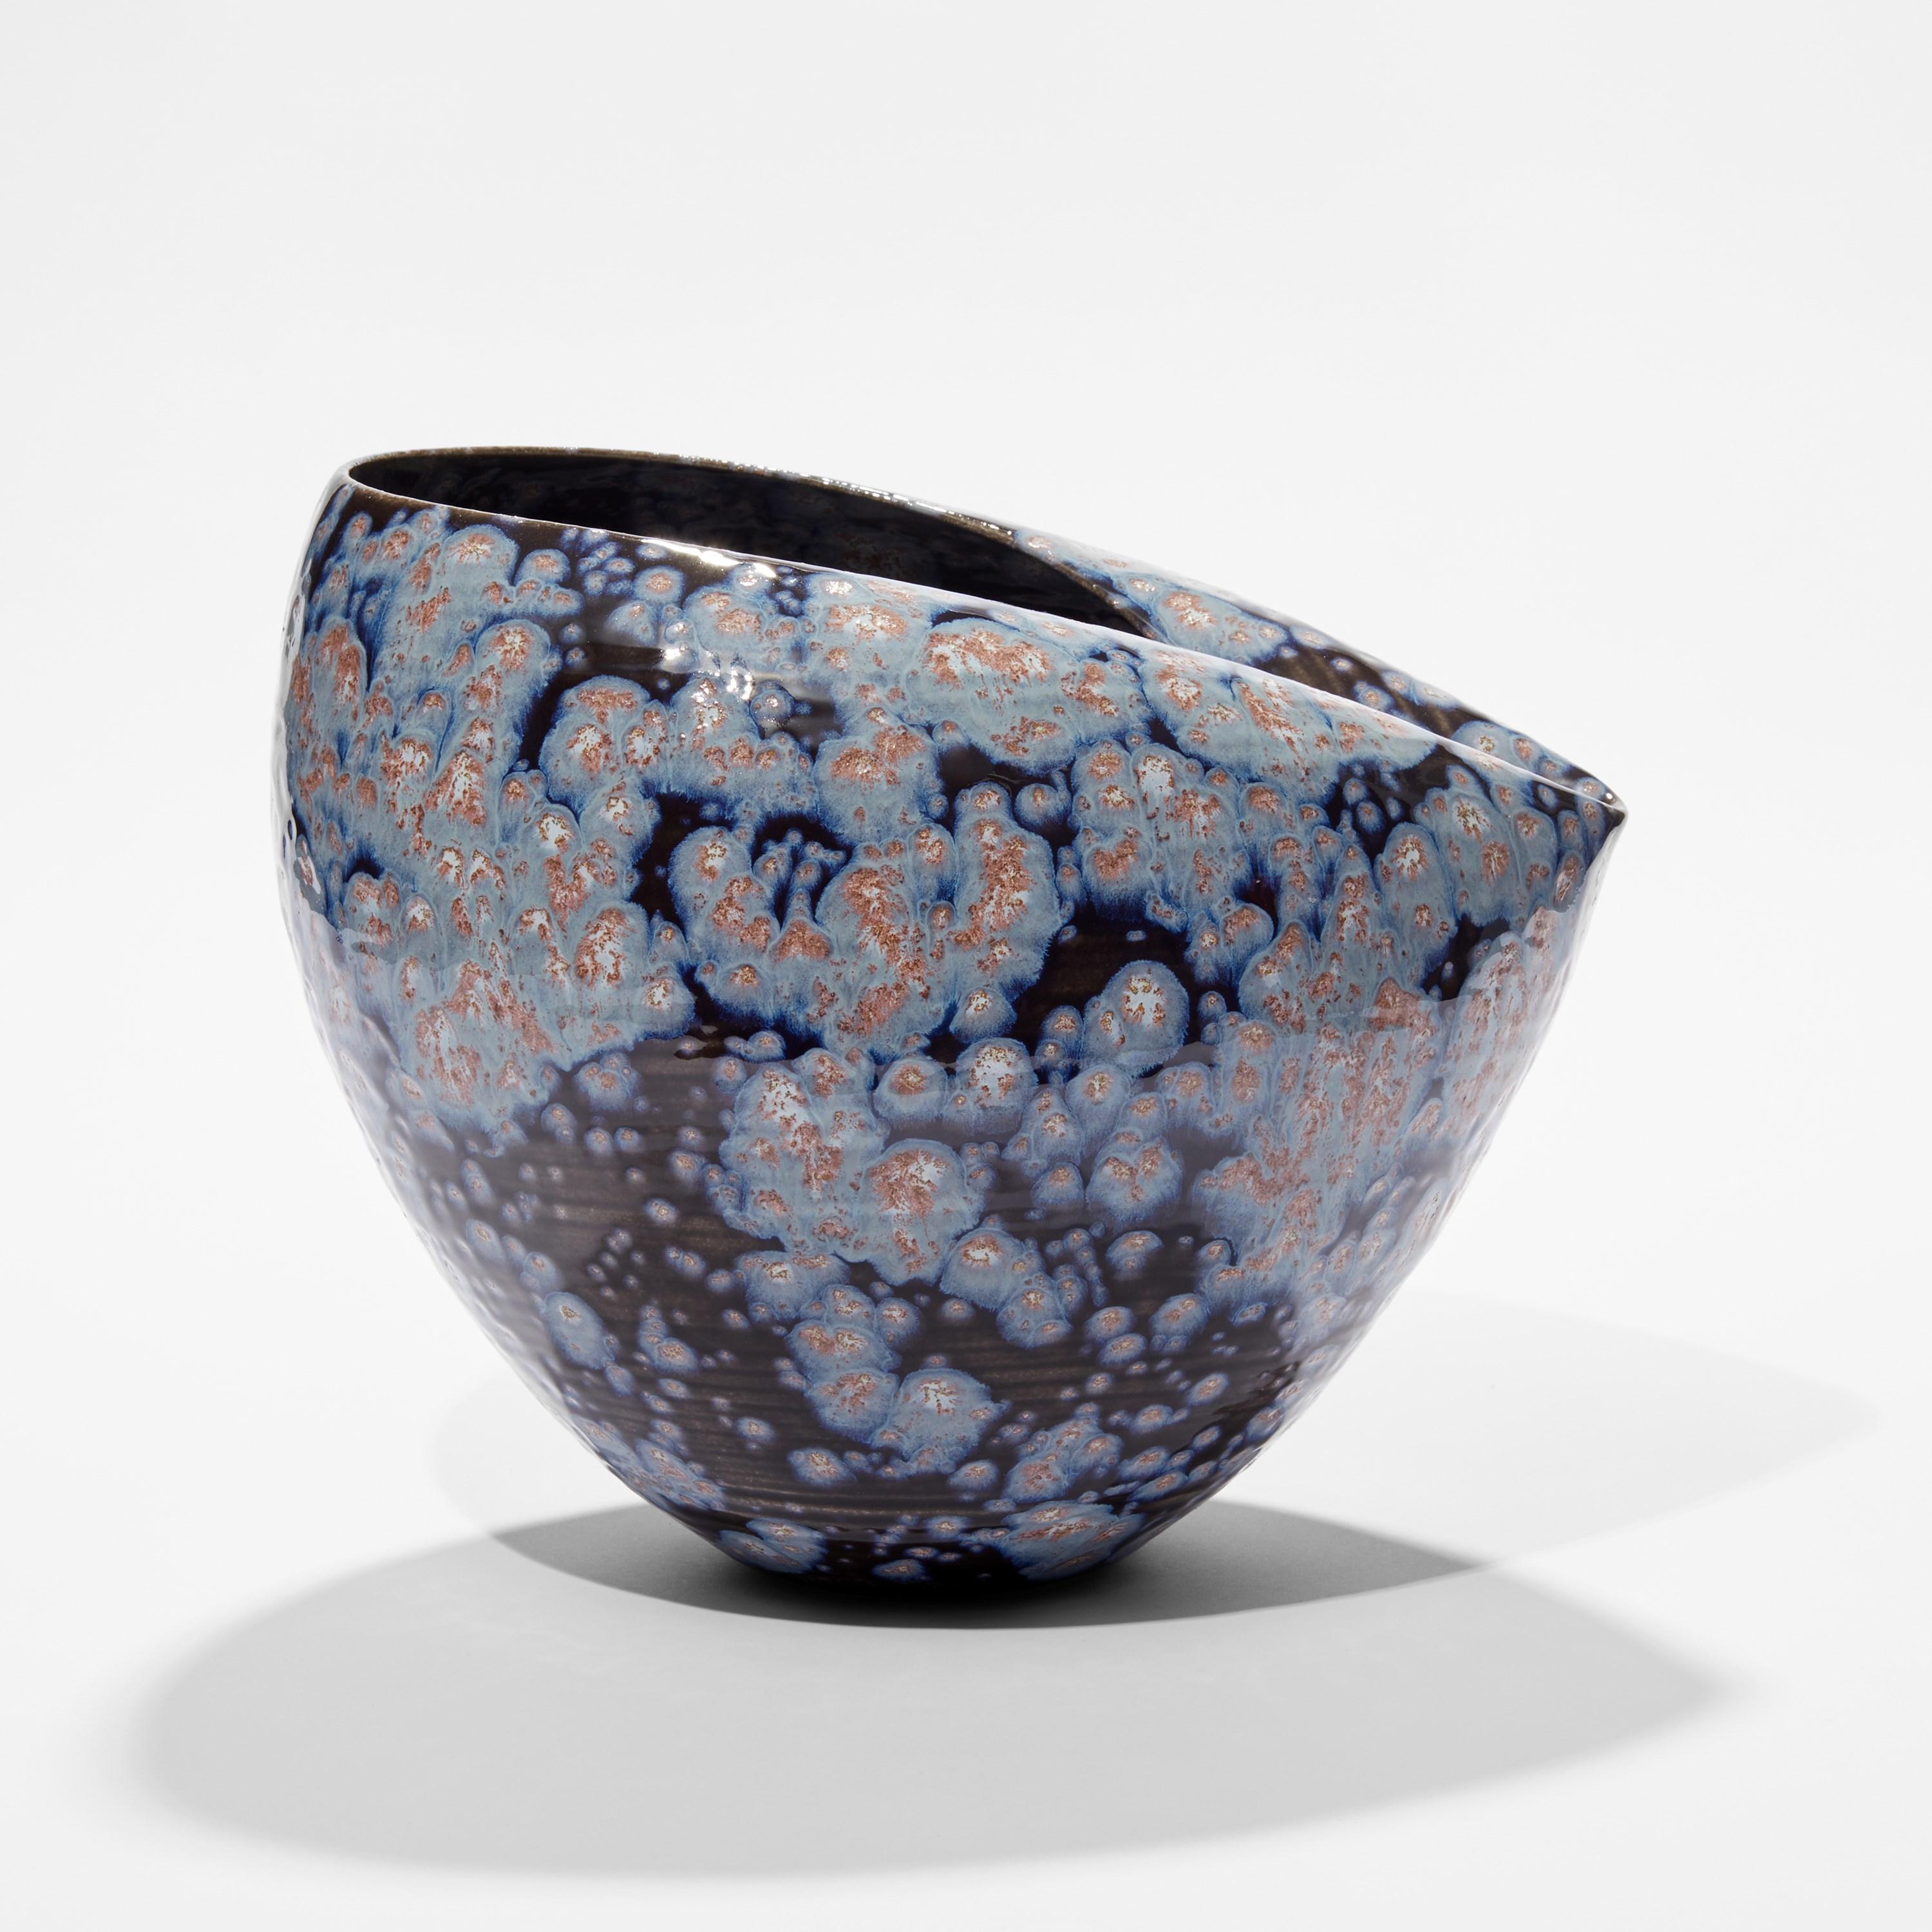 Organic Modern Oval Form in Galactic Blue No 88, a Ceramic Vessel by Nicholas Arroyave-Portela For Sale